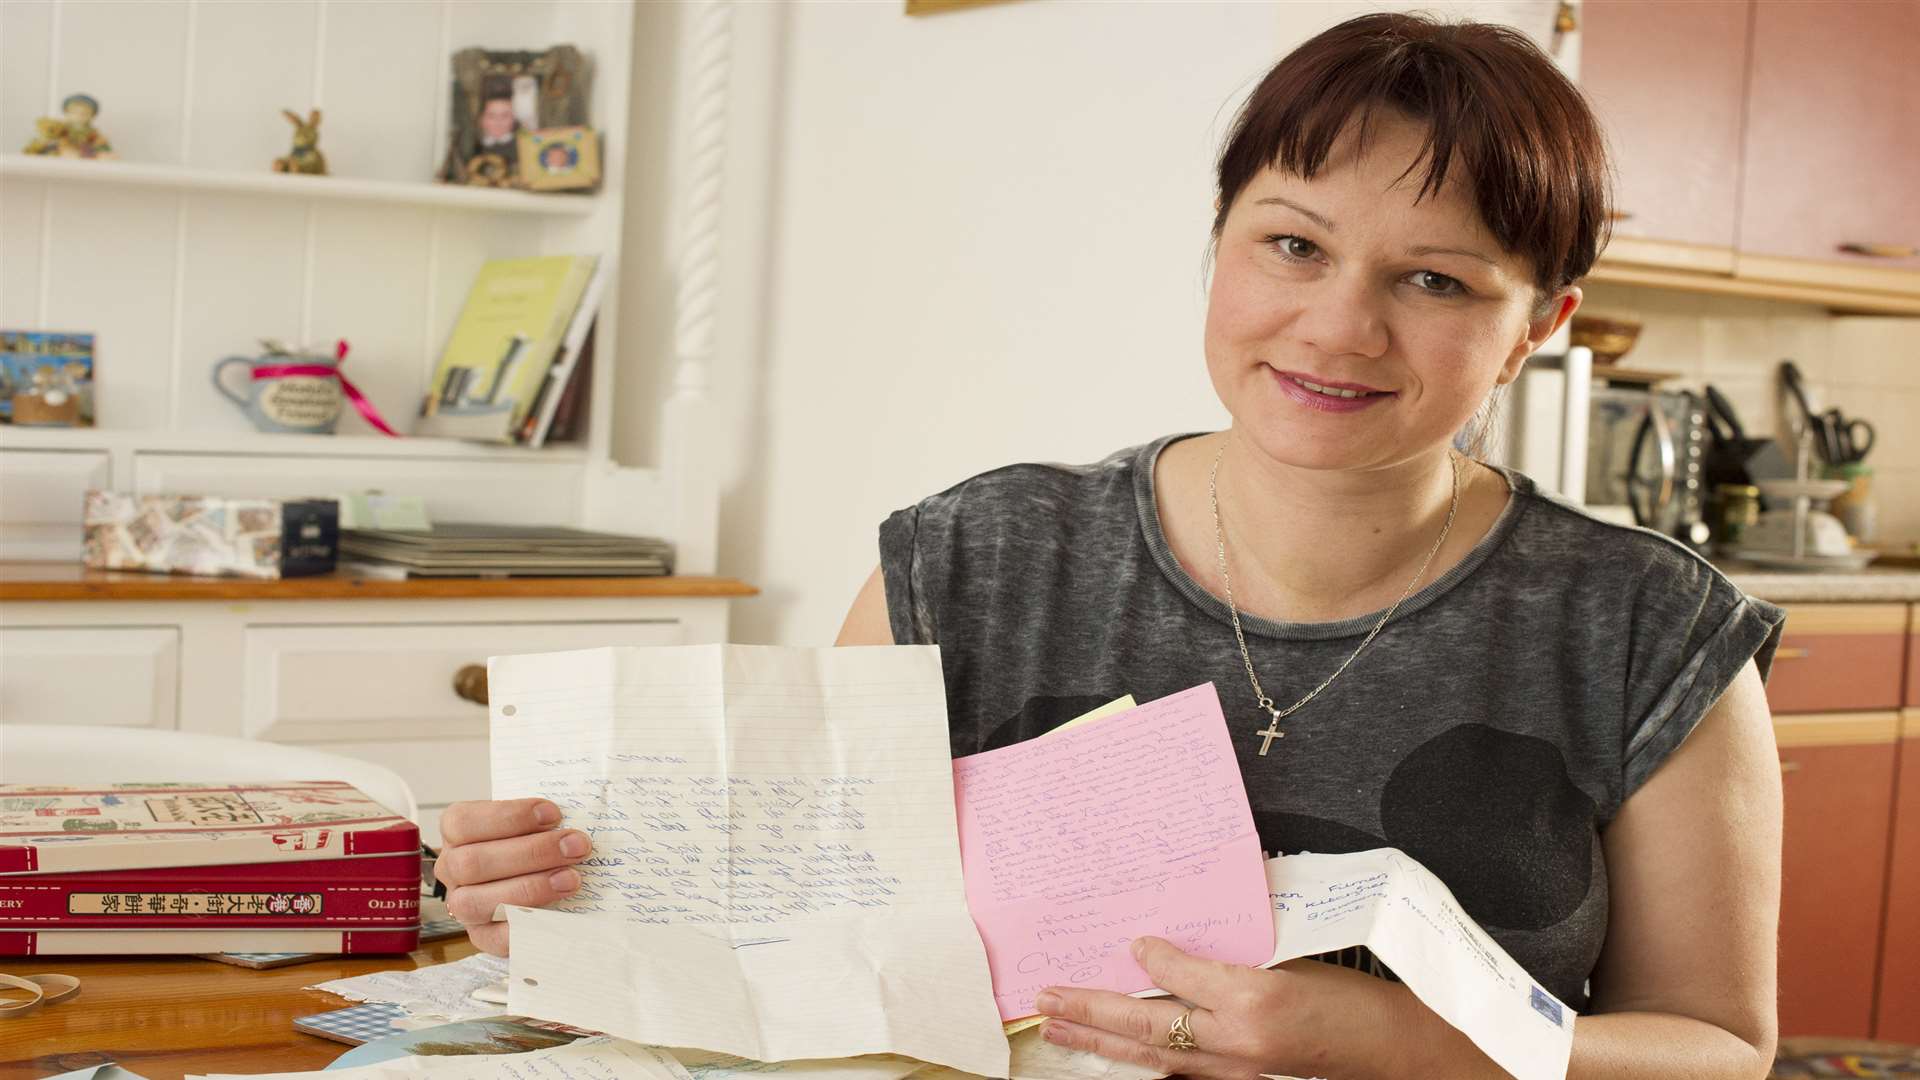 Agnes Antoszek found a hoard of love letters under the floorboards